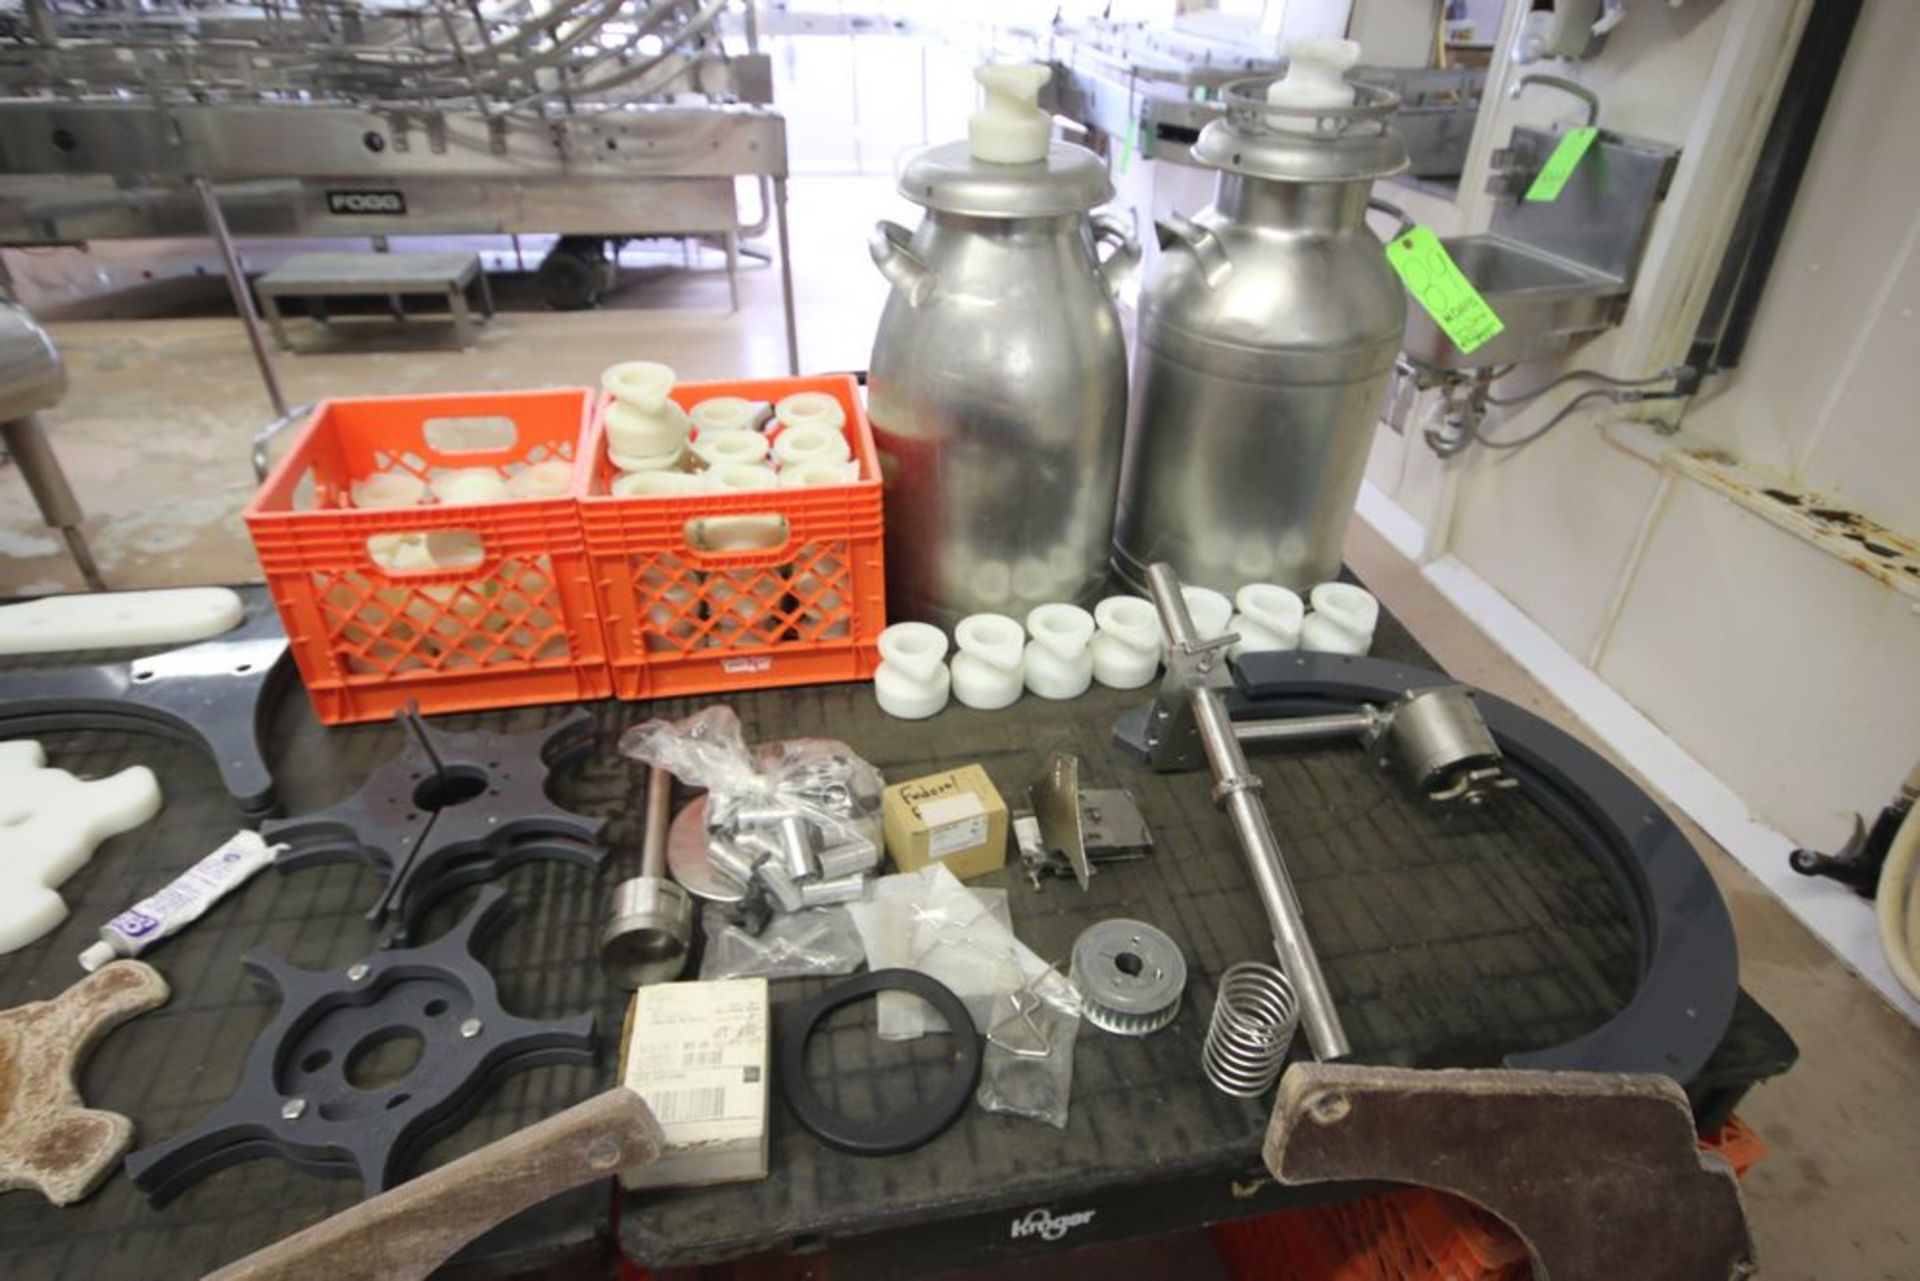 Large Assortment of Federal Filler Change Parts and Spare Parts, Includes Federal Capper Columns, - Image 10 of 10